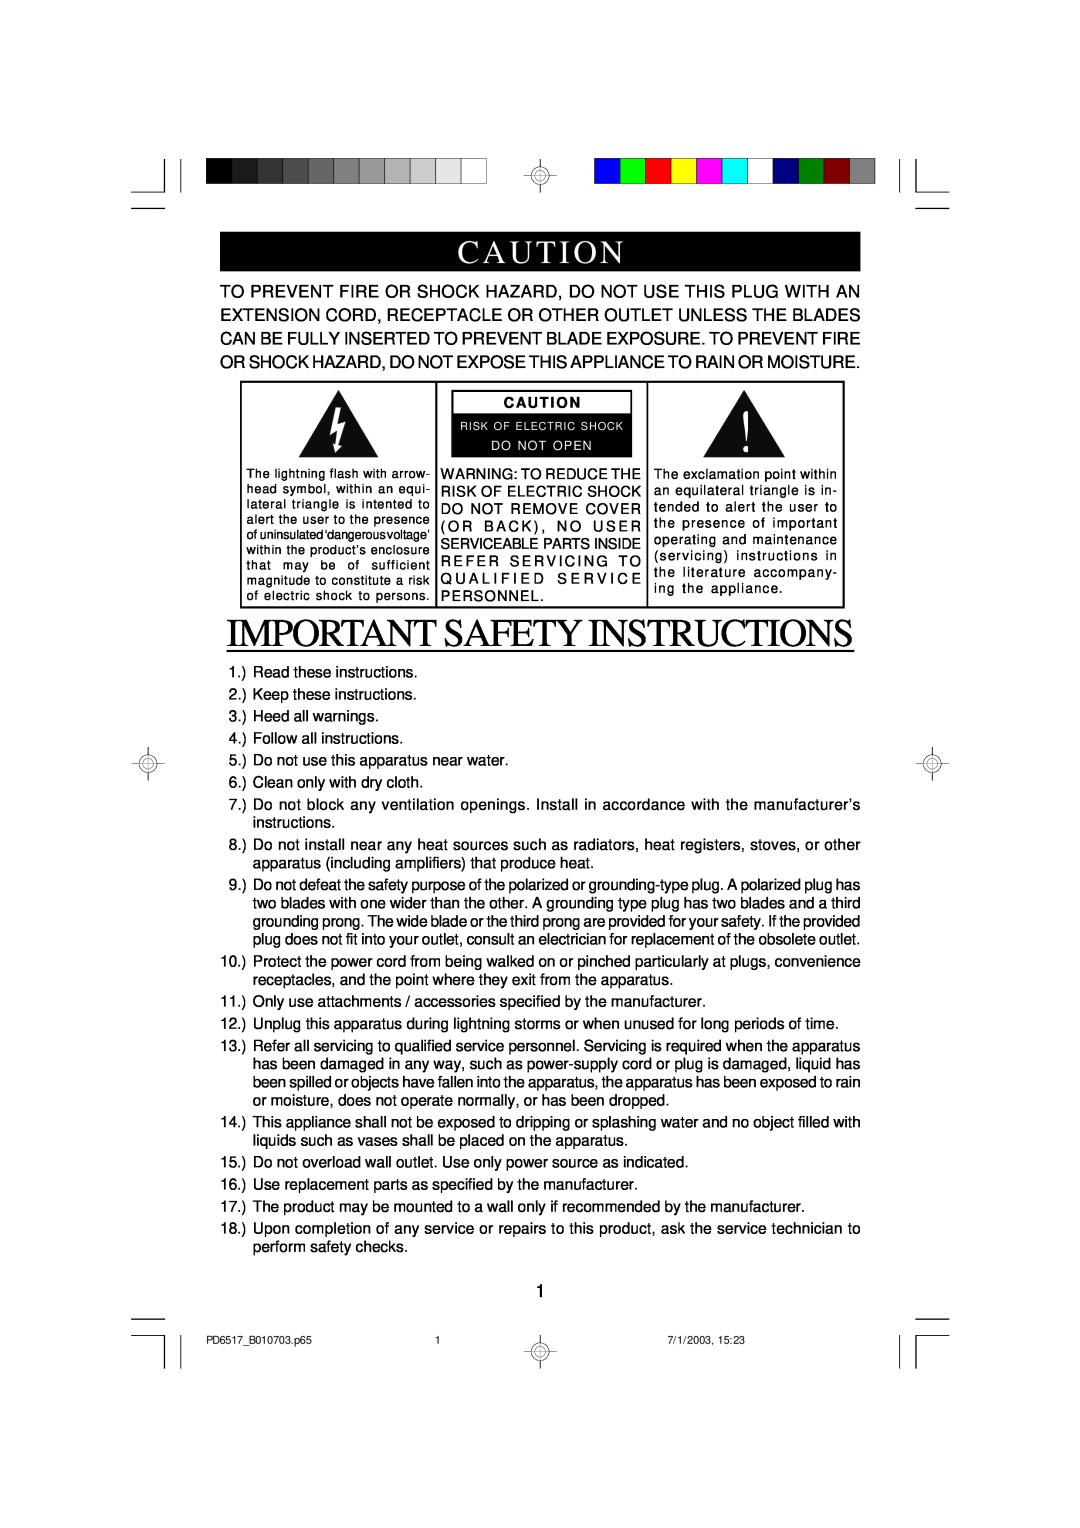 Emerson PD6517 owner manual Important Safety Instructions, Caut I On, Caut I O N 